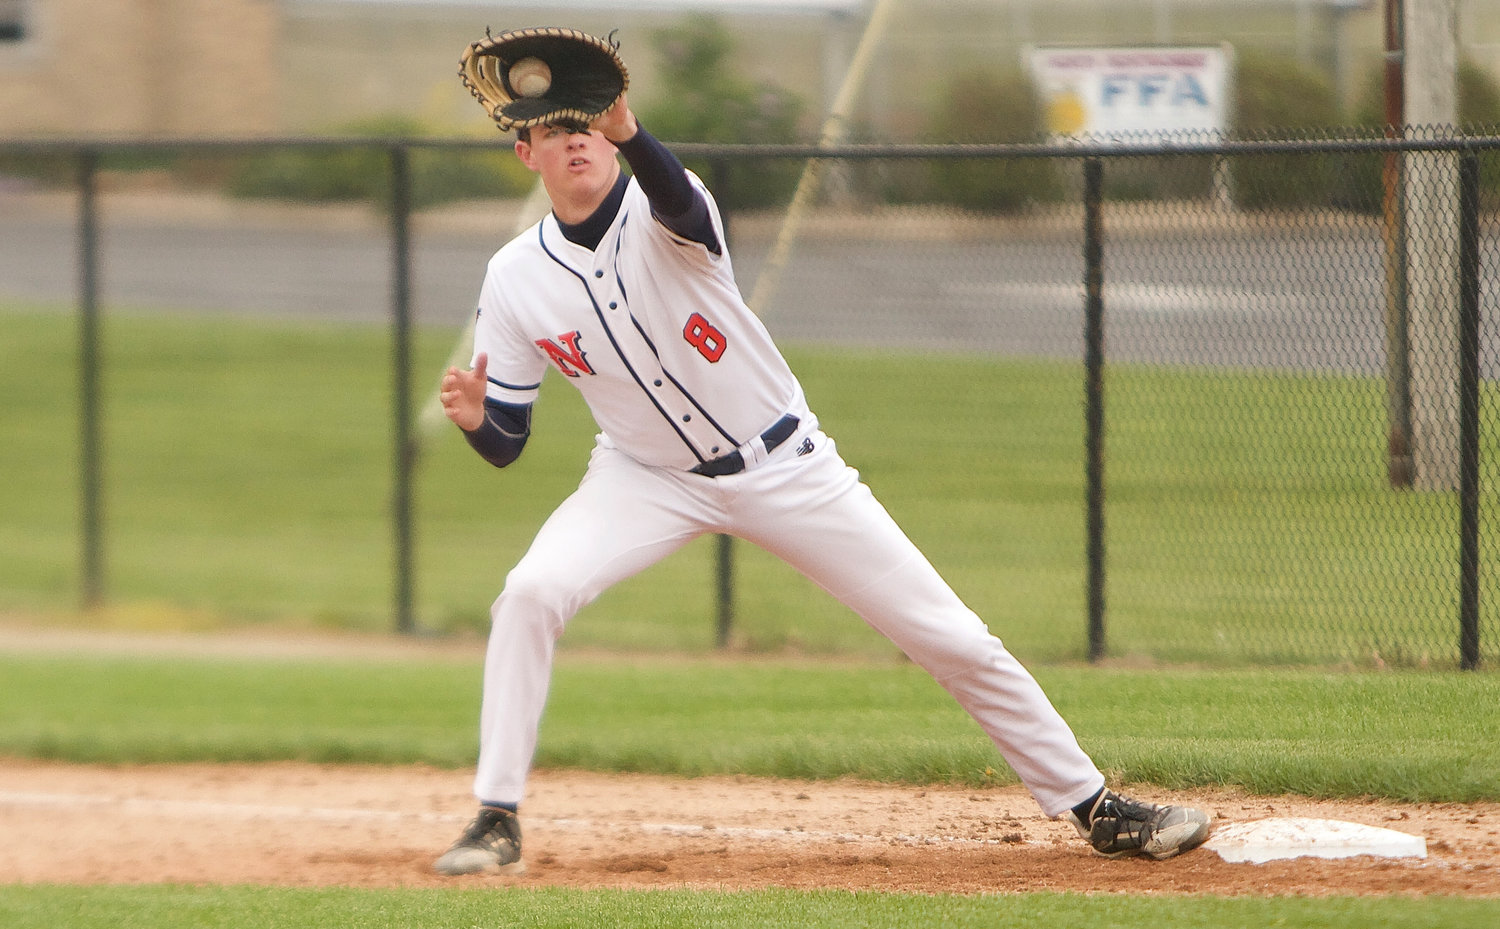 Brayden Martin saw action at first base for the Chargers.